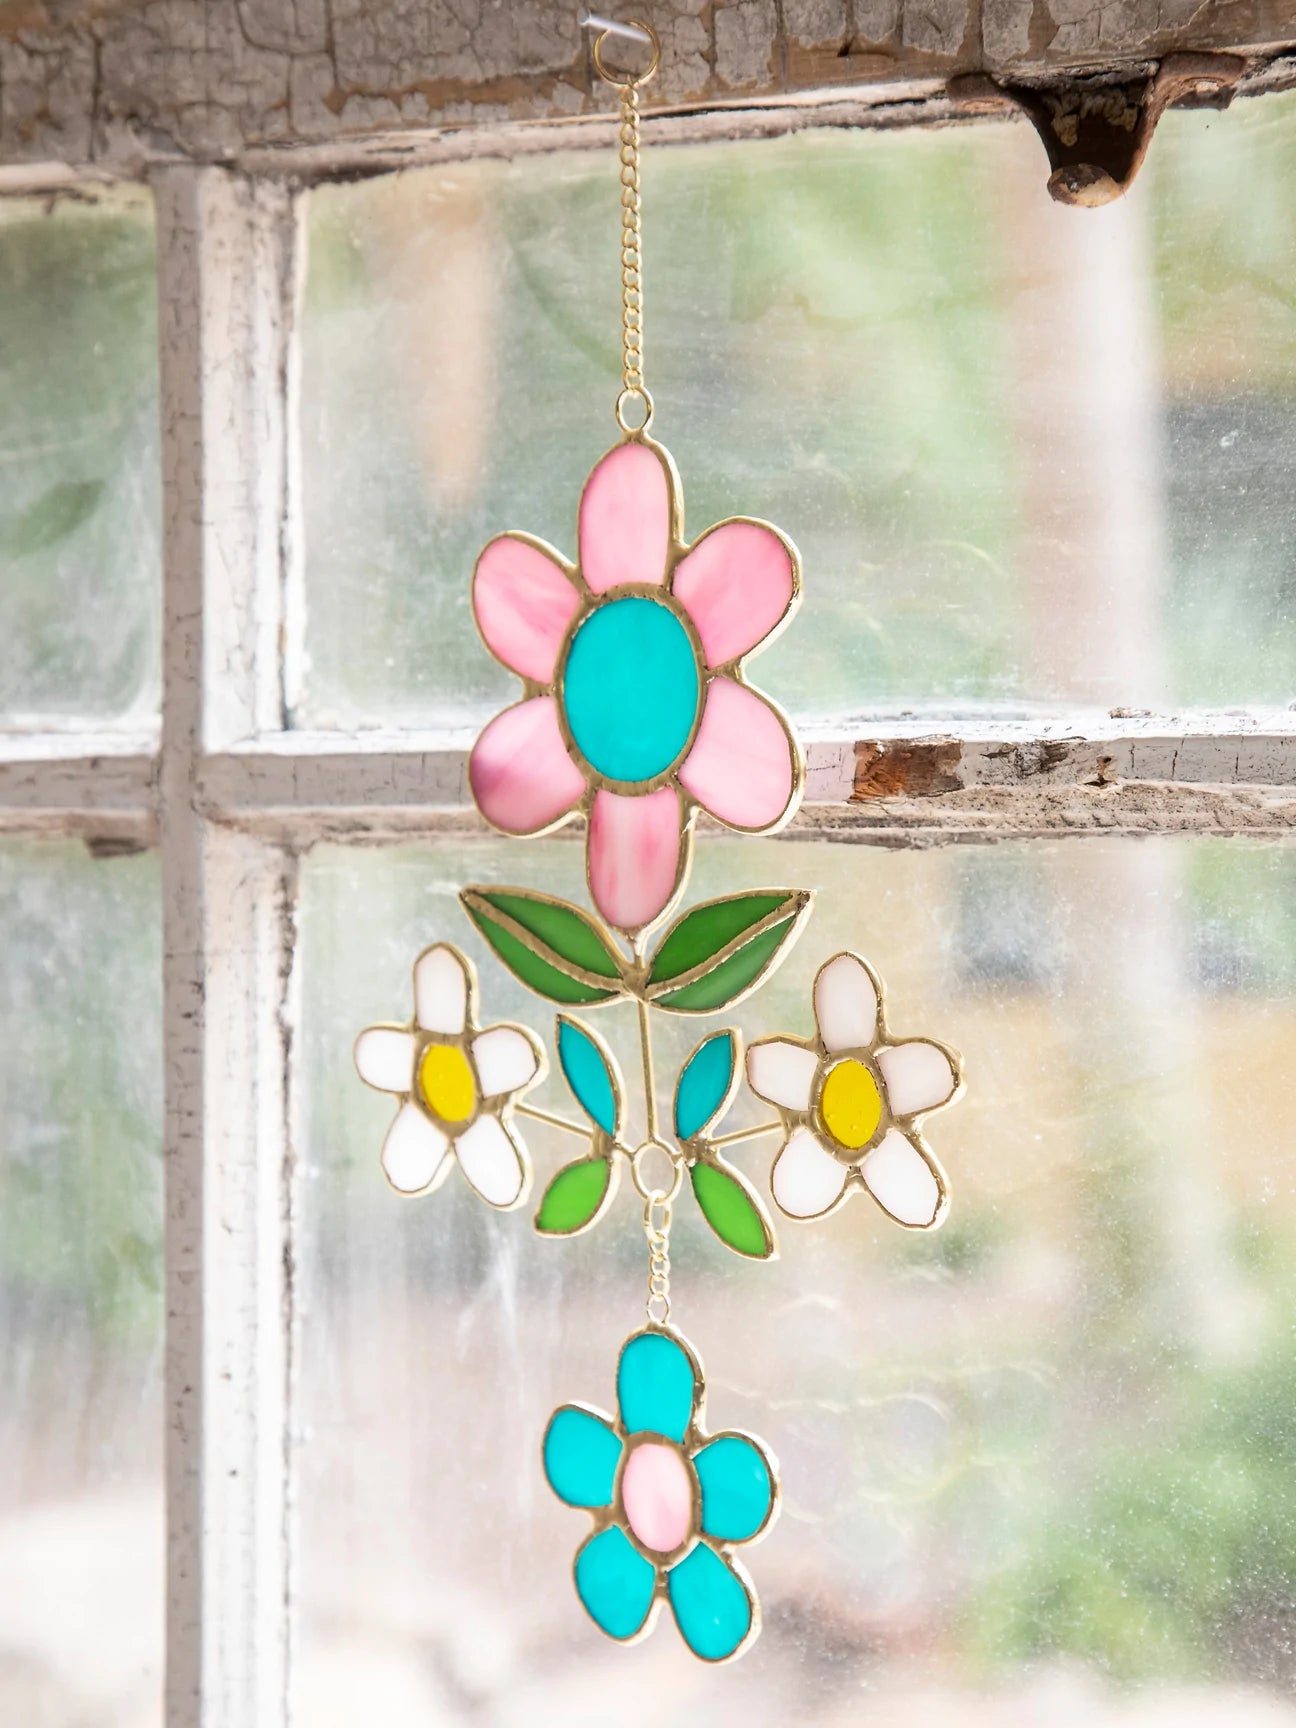 Stained Glass Flower